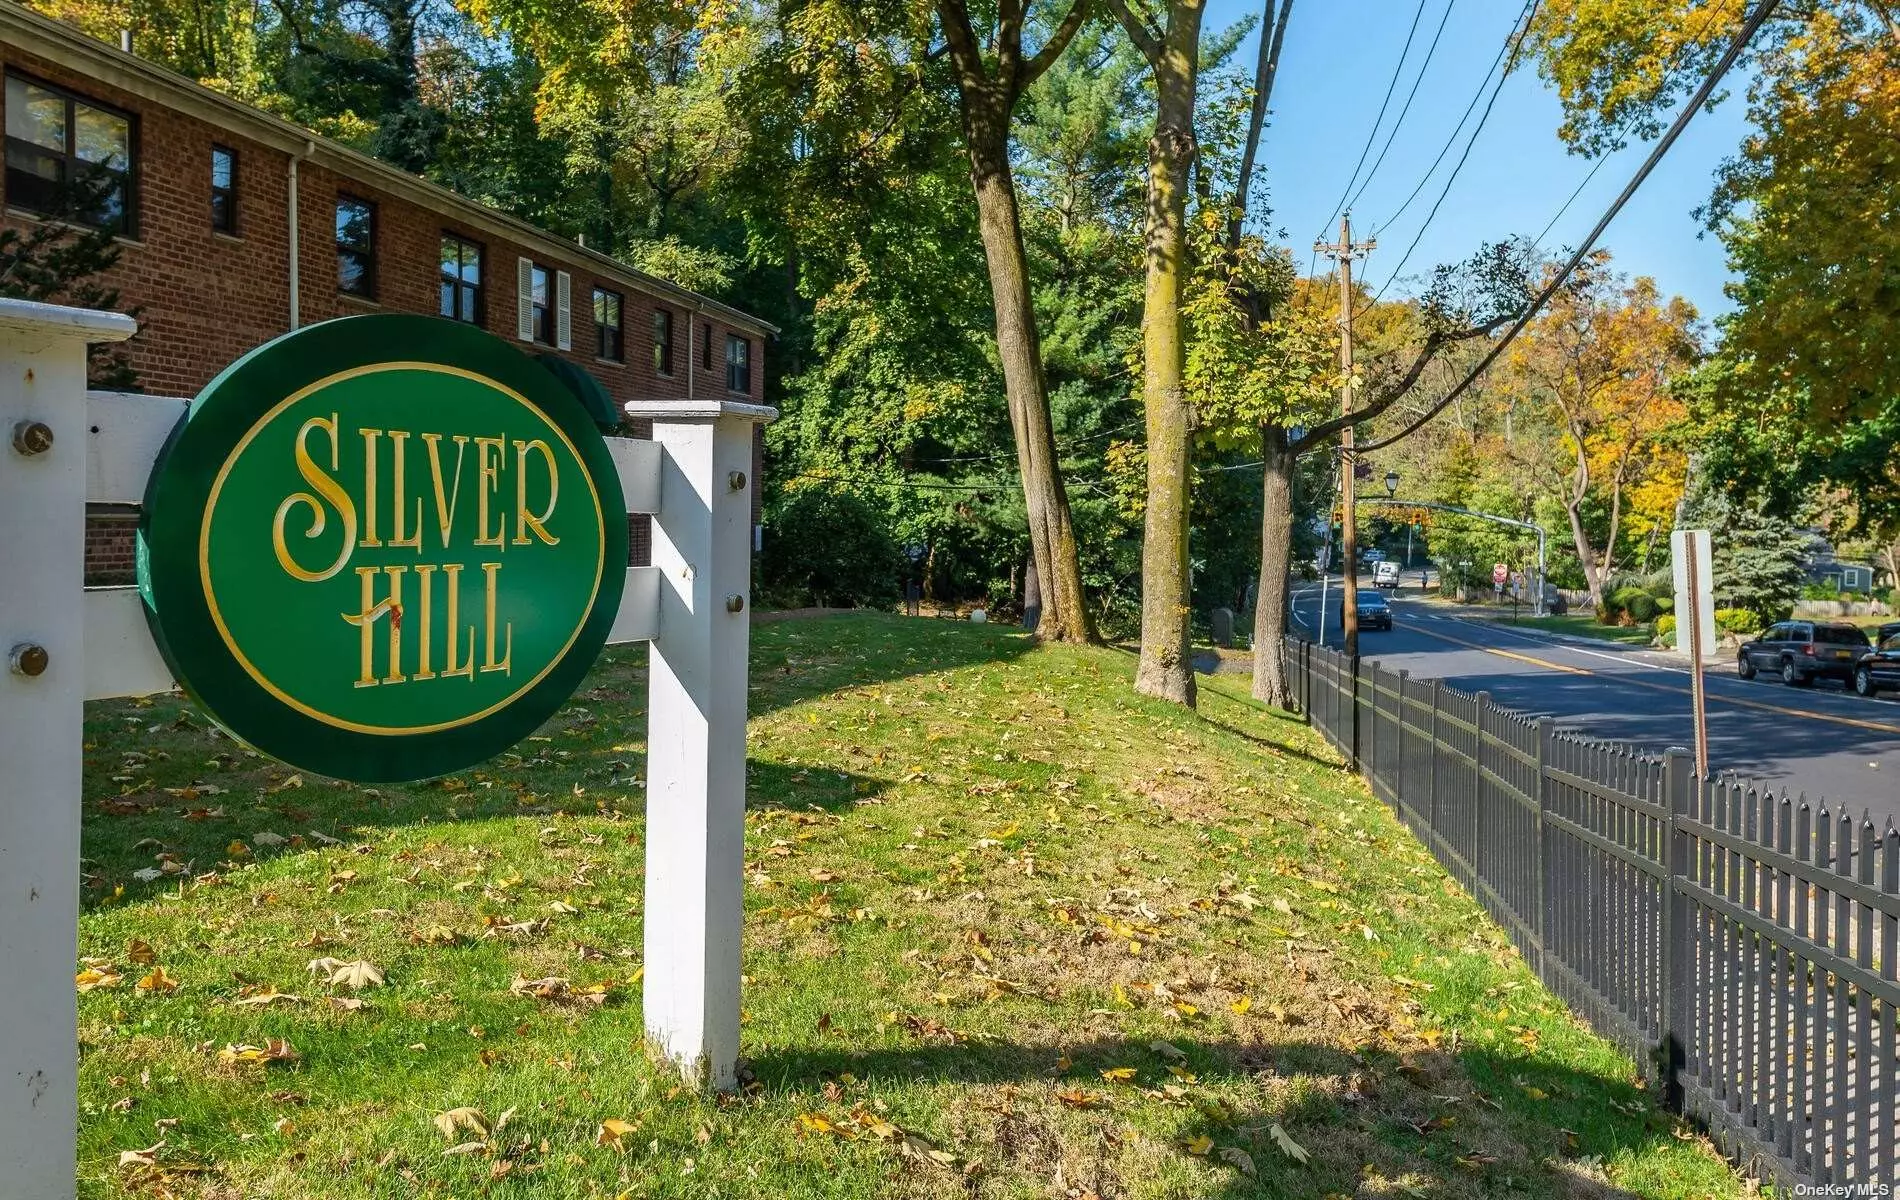 Pristine One Bedroom Co-Op Located In Silver Hill. Lovely Recently Remodeled Kitchen & Bath, Hardwood Floors, Spacious Bedroom, Ample Closet Space. Laundry In Building, Walkout Basement To Parking Area. Walk To Railroad & Roslyn Village.